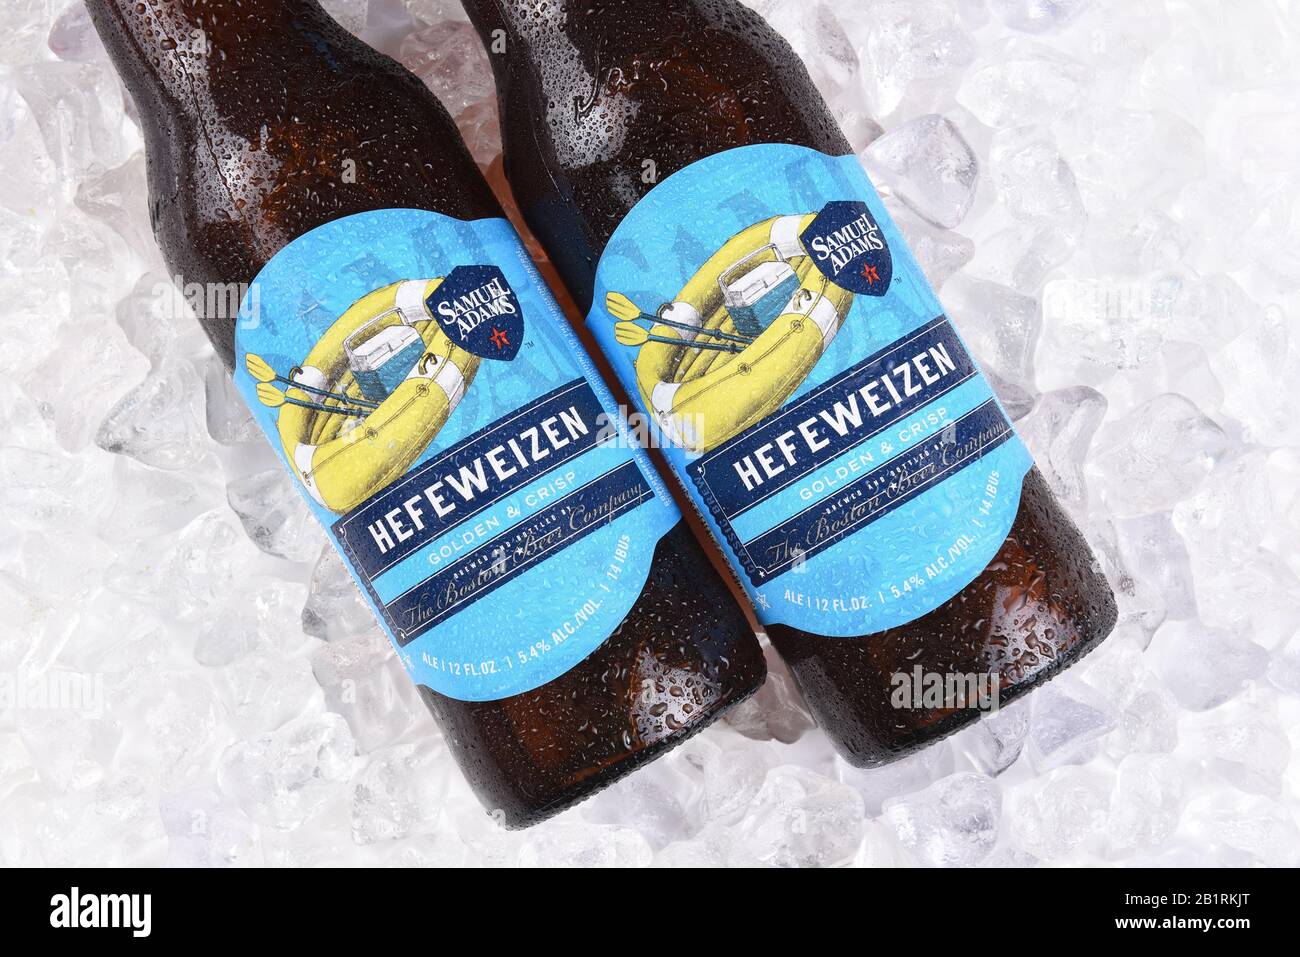 IRVINE, CA - JULY 16, 2017: Samuel Adams Hefeweizen bottle on ice. From the Boston Beer Company. Based on sales in 2016, it is the second largest craf Stock Photo